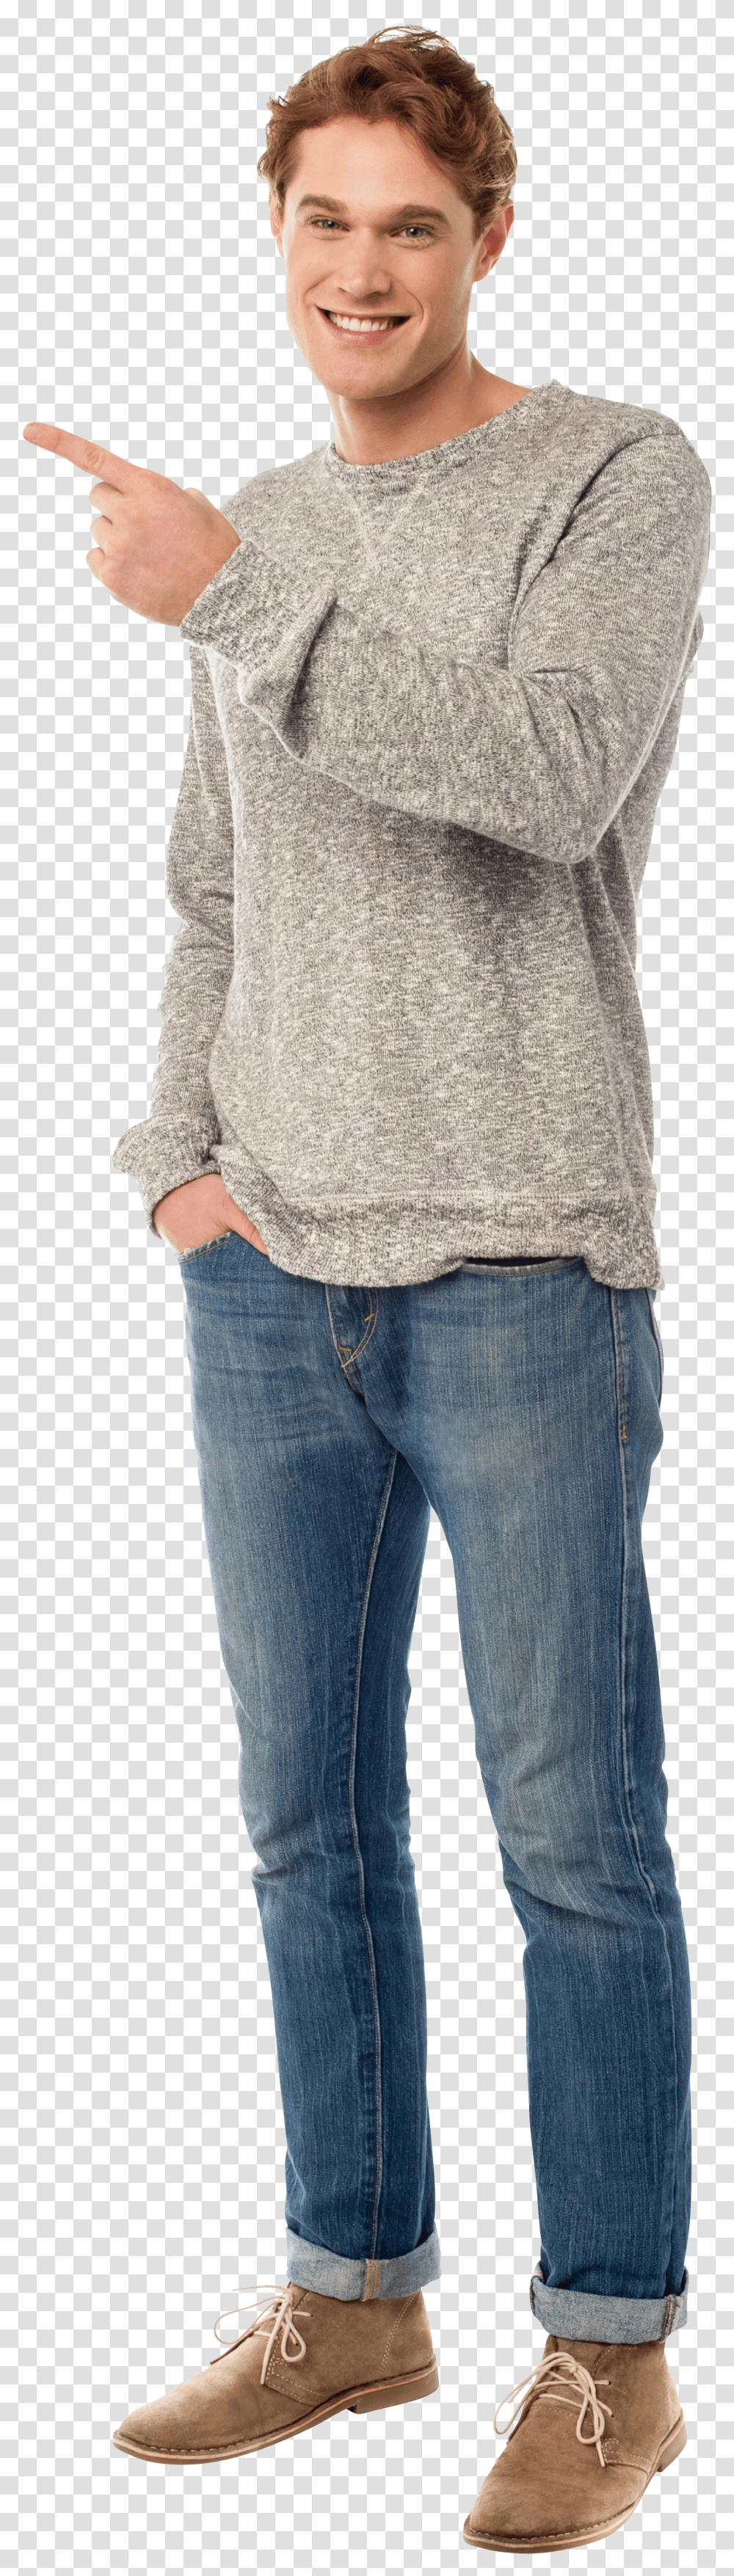 Man Pointing Full Body Transparent Png